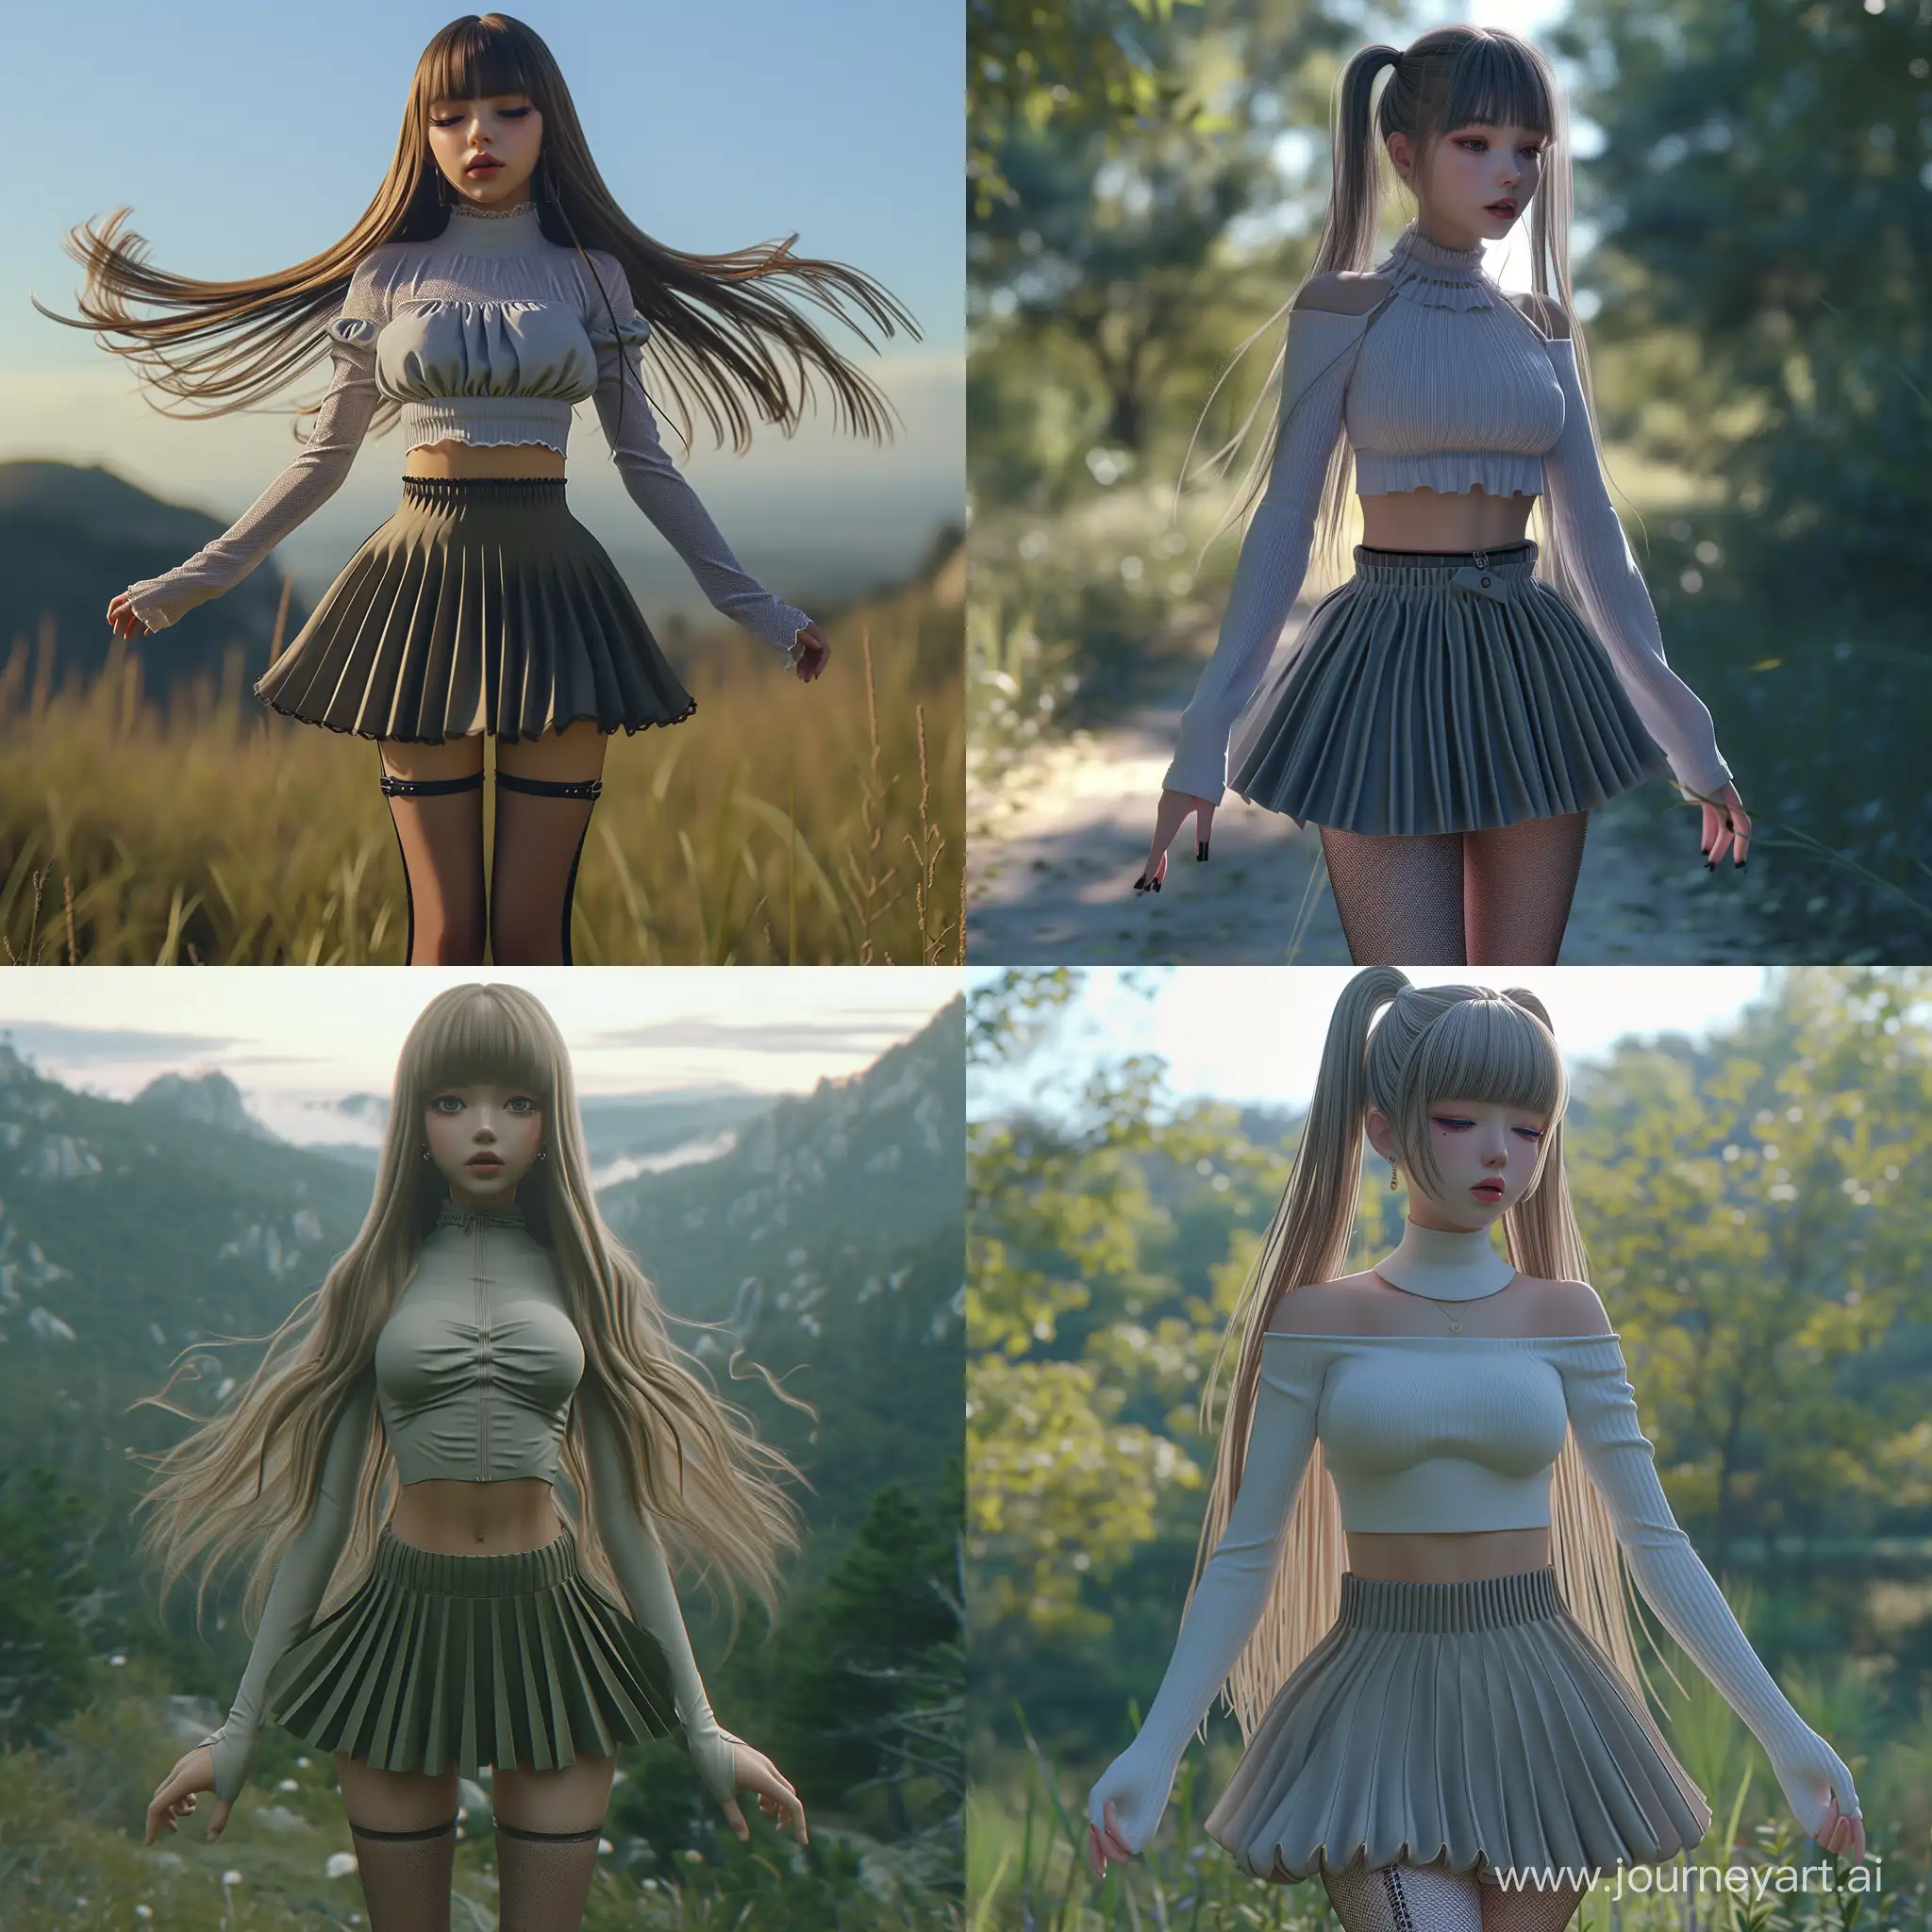 Dreamy-Girl-in-Pleated-Skirt-and-ThighHigh-Stockings-Amidst-Ethereal-Scenery